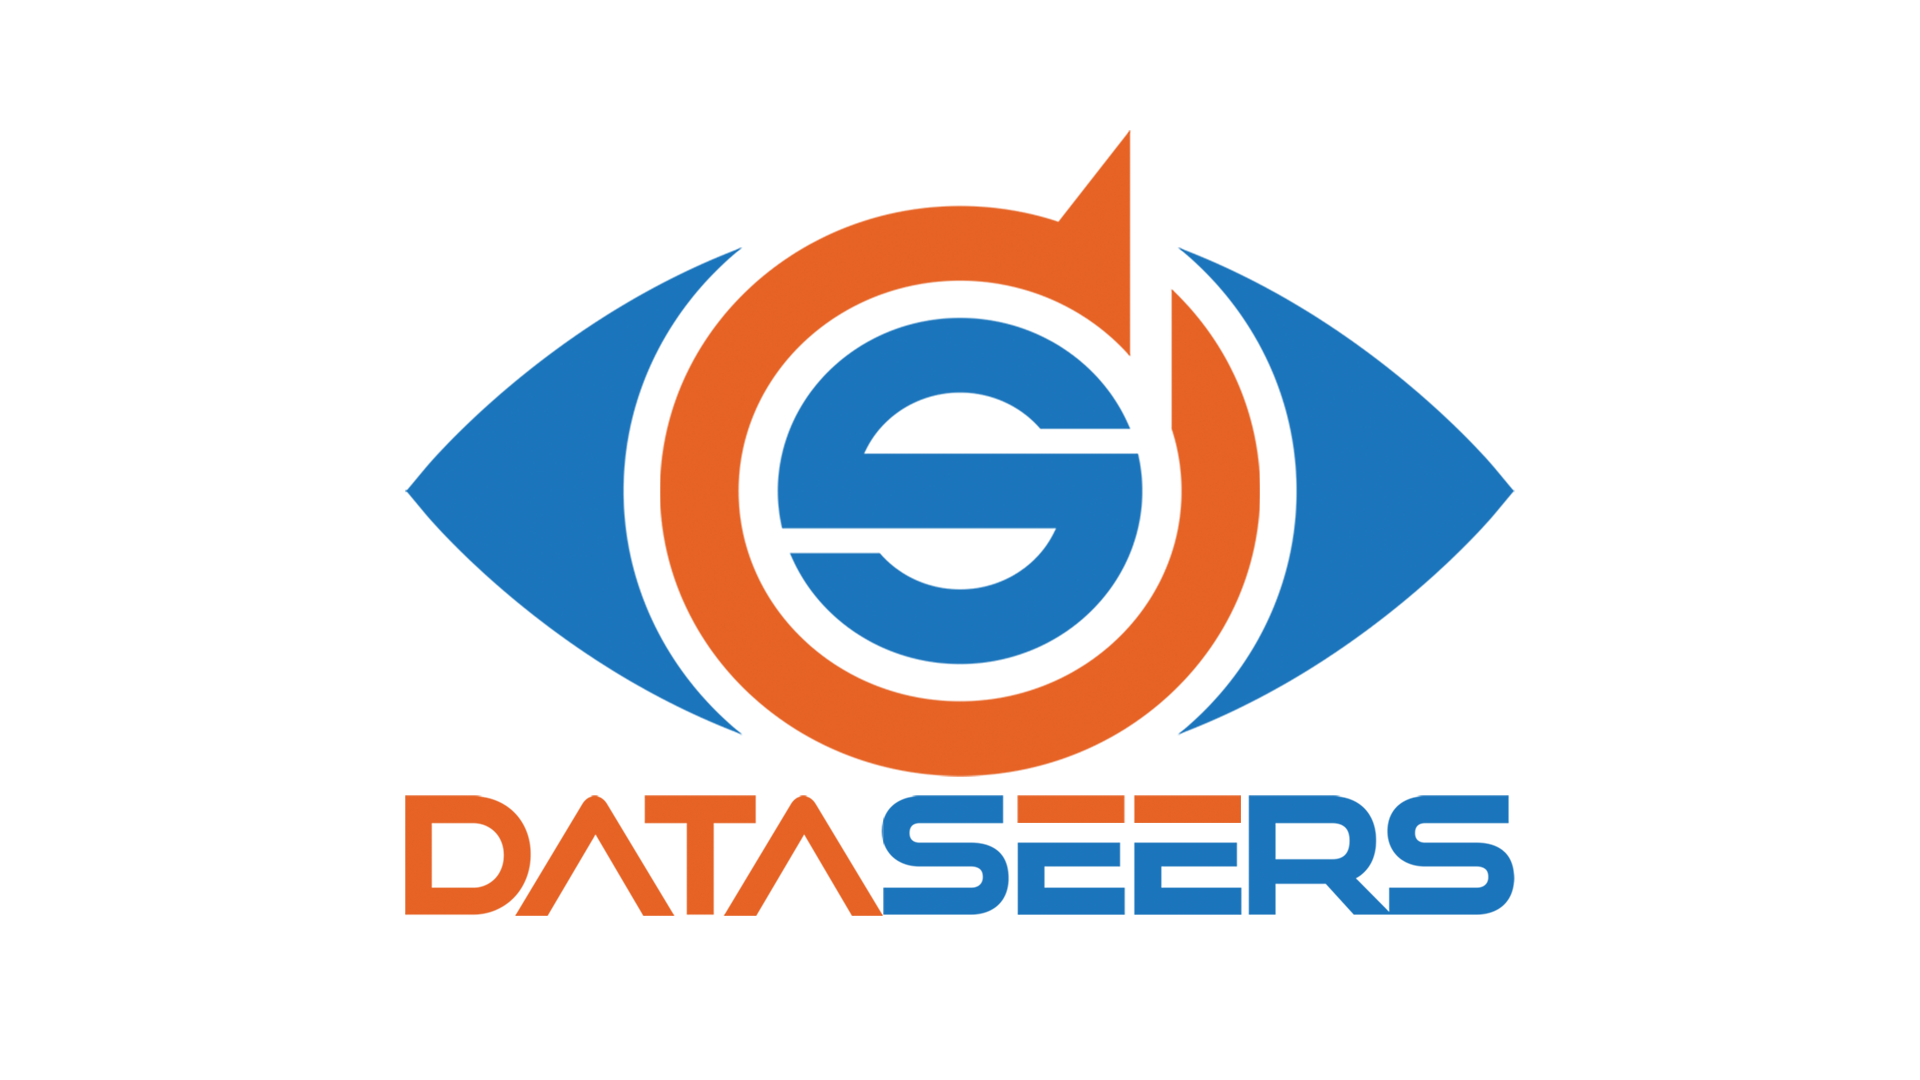 DataSeers® offers an AI solution for banking and payments. It is an industry recognized multichannel software that helps you manage money, fight fraud, maintain compliance, and market to customers.